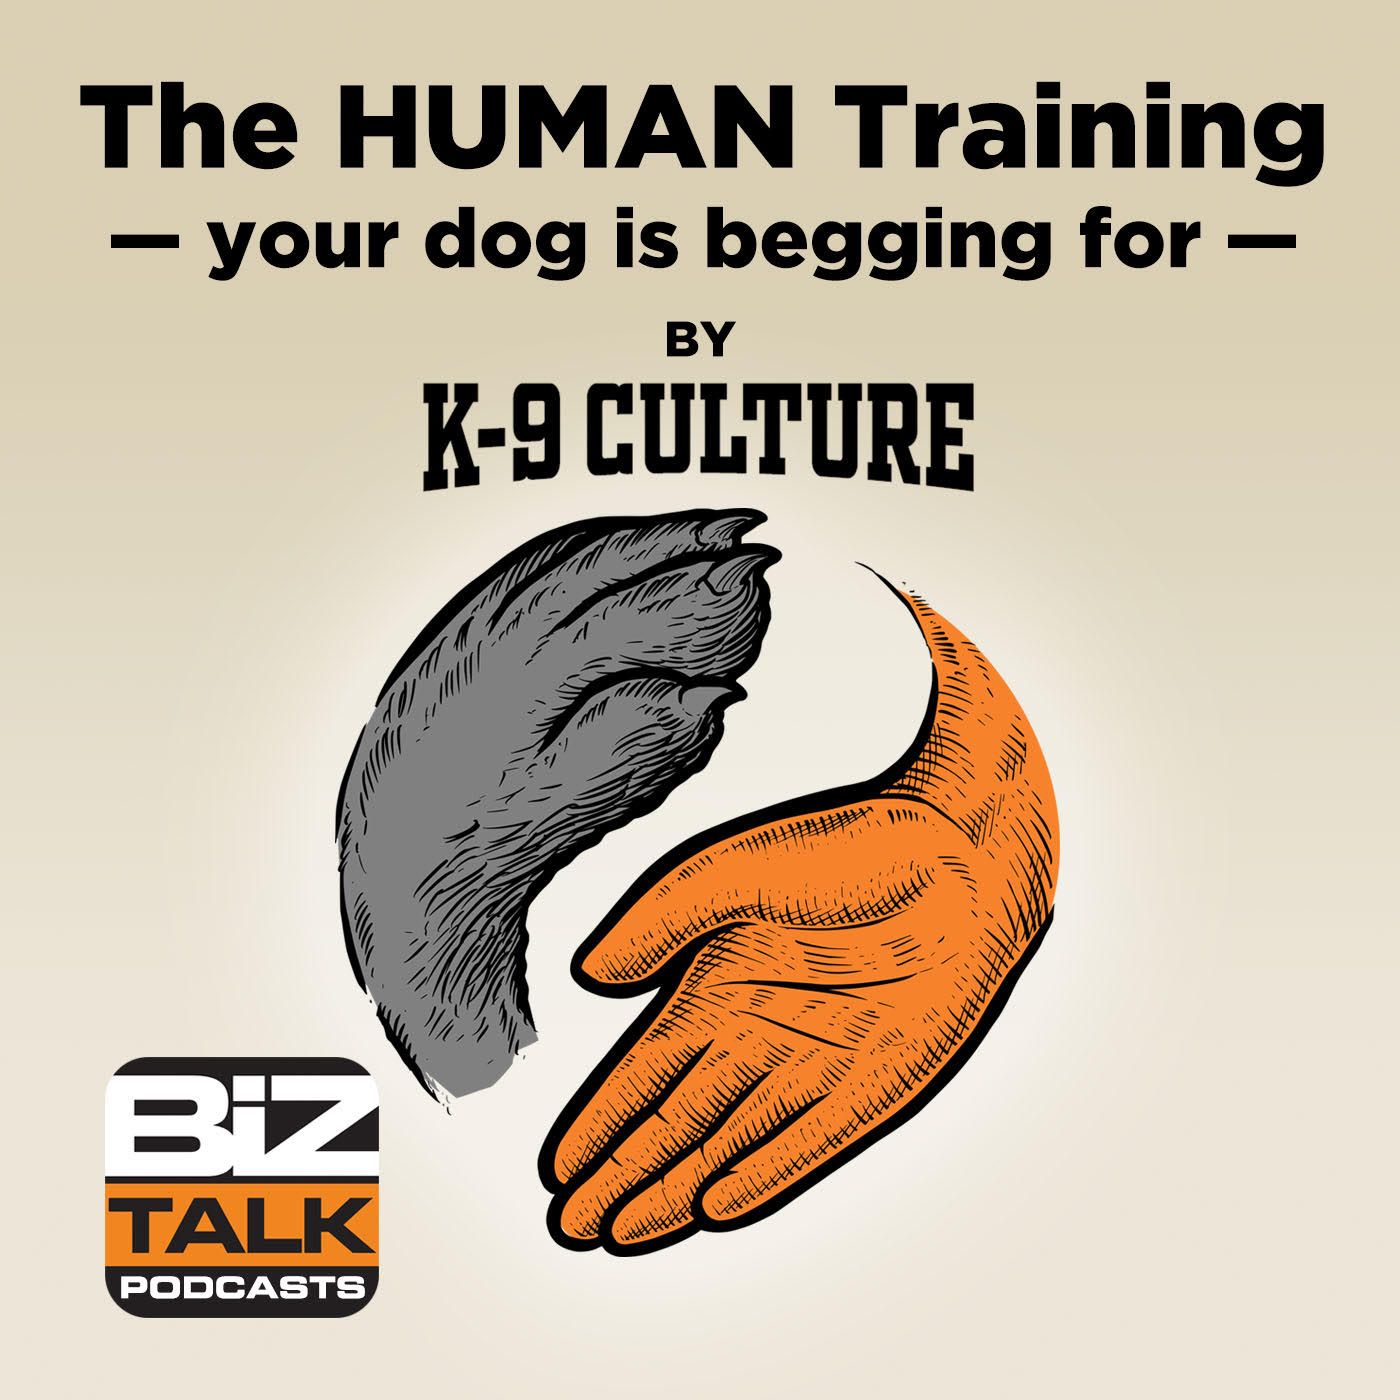 The Truth About Dominance-Based Dog Training